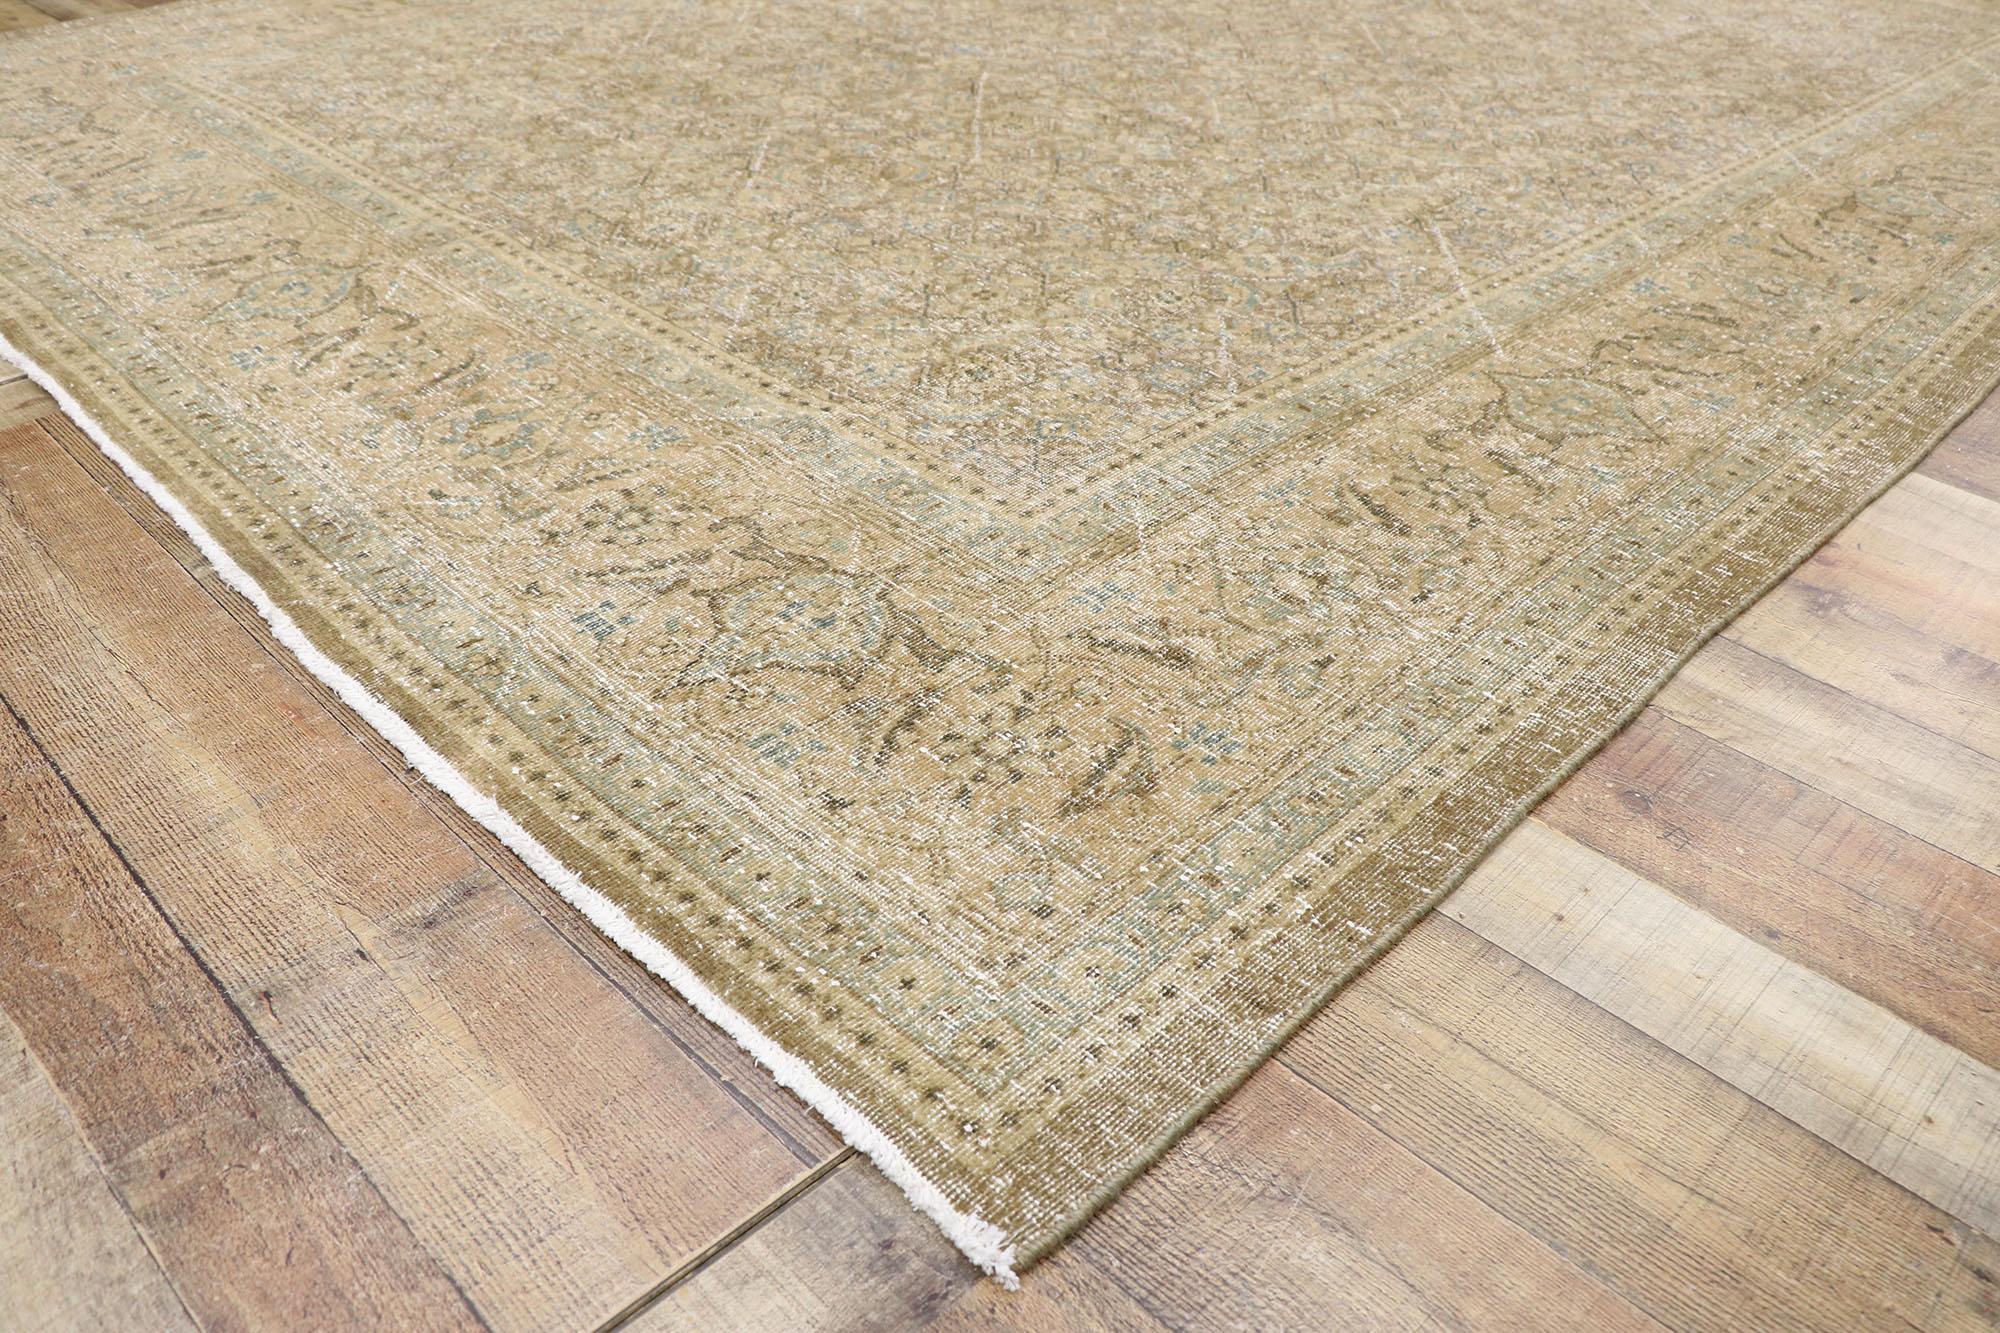 20th Century Distressed Antique Persian Mahal Rug with Modern Rustic Shaker Style